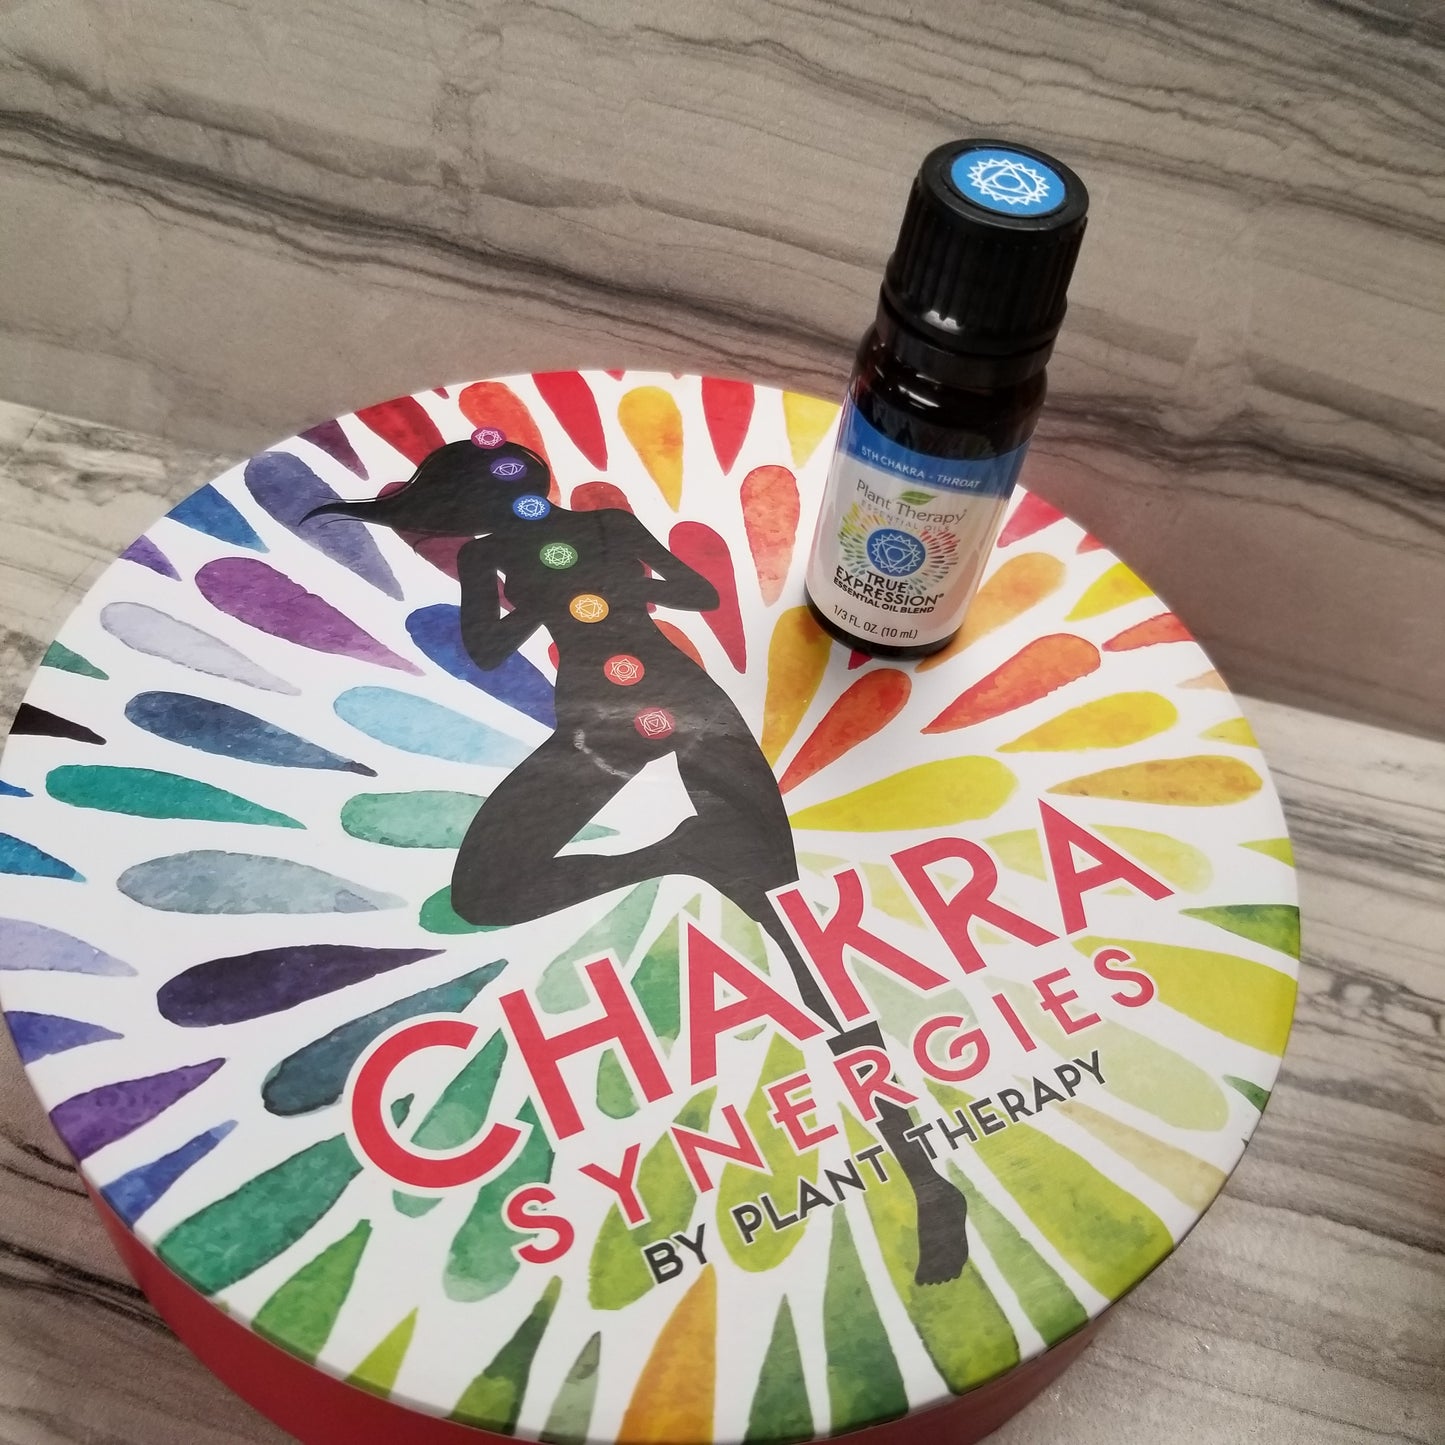 Chakra essential oils and more!